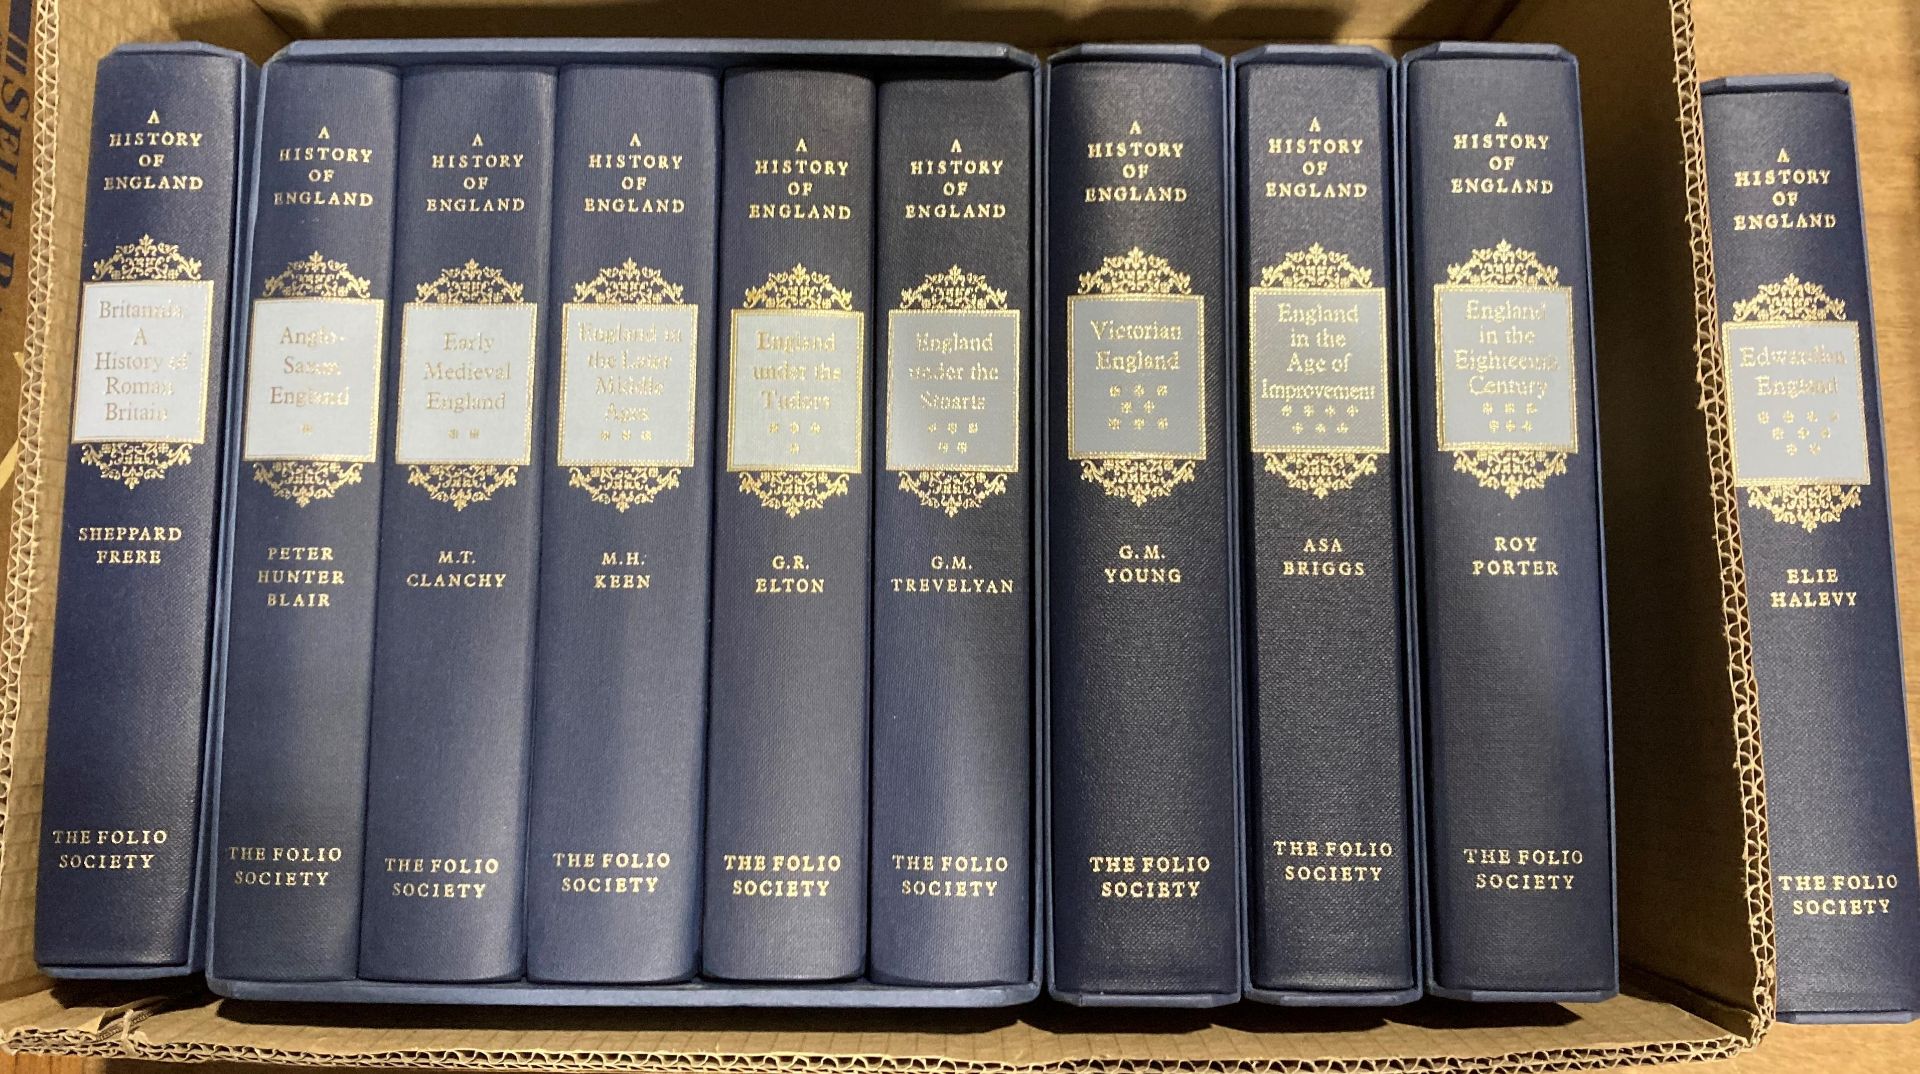 Folio Society - ten volumes 'A History of England' - five individual volumes in cases and a five